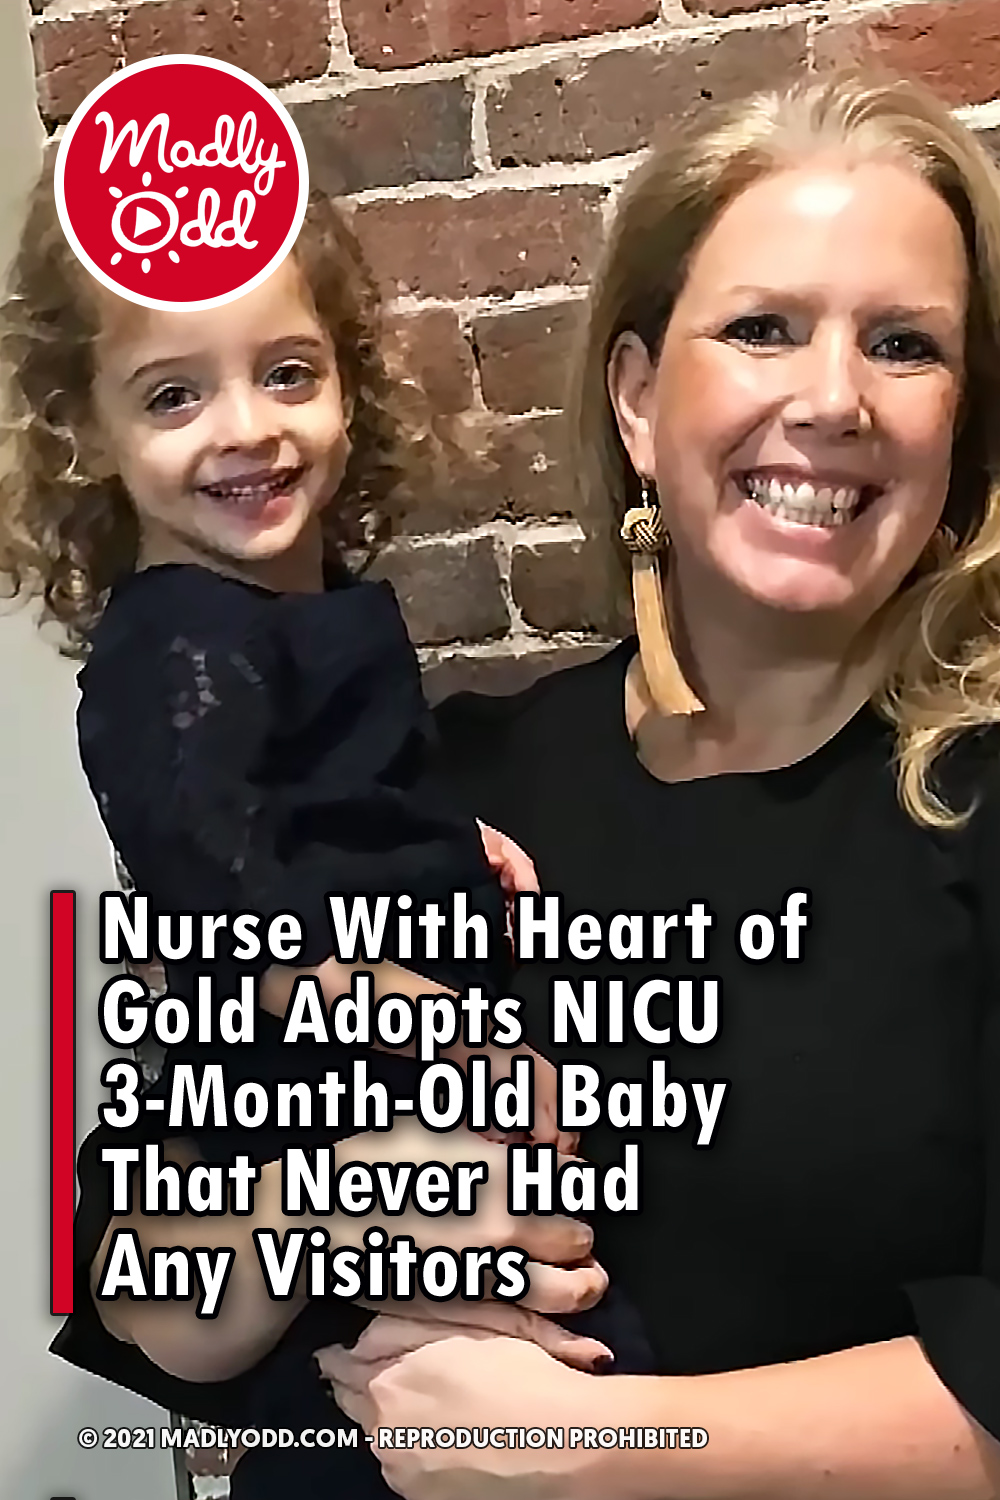 Nurse With Heart of Gold Adopts NICU 3-Month-Old Baby That Never Had Any Visitors